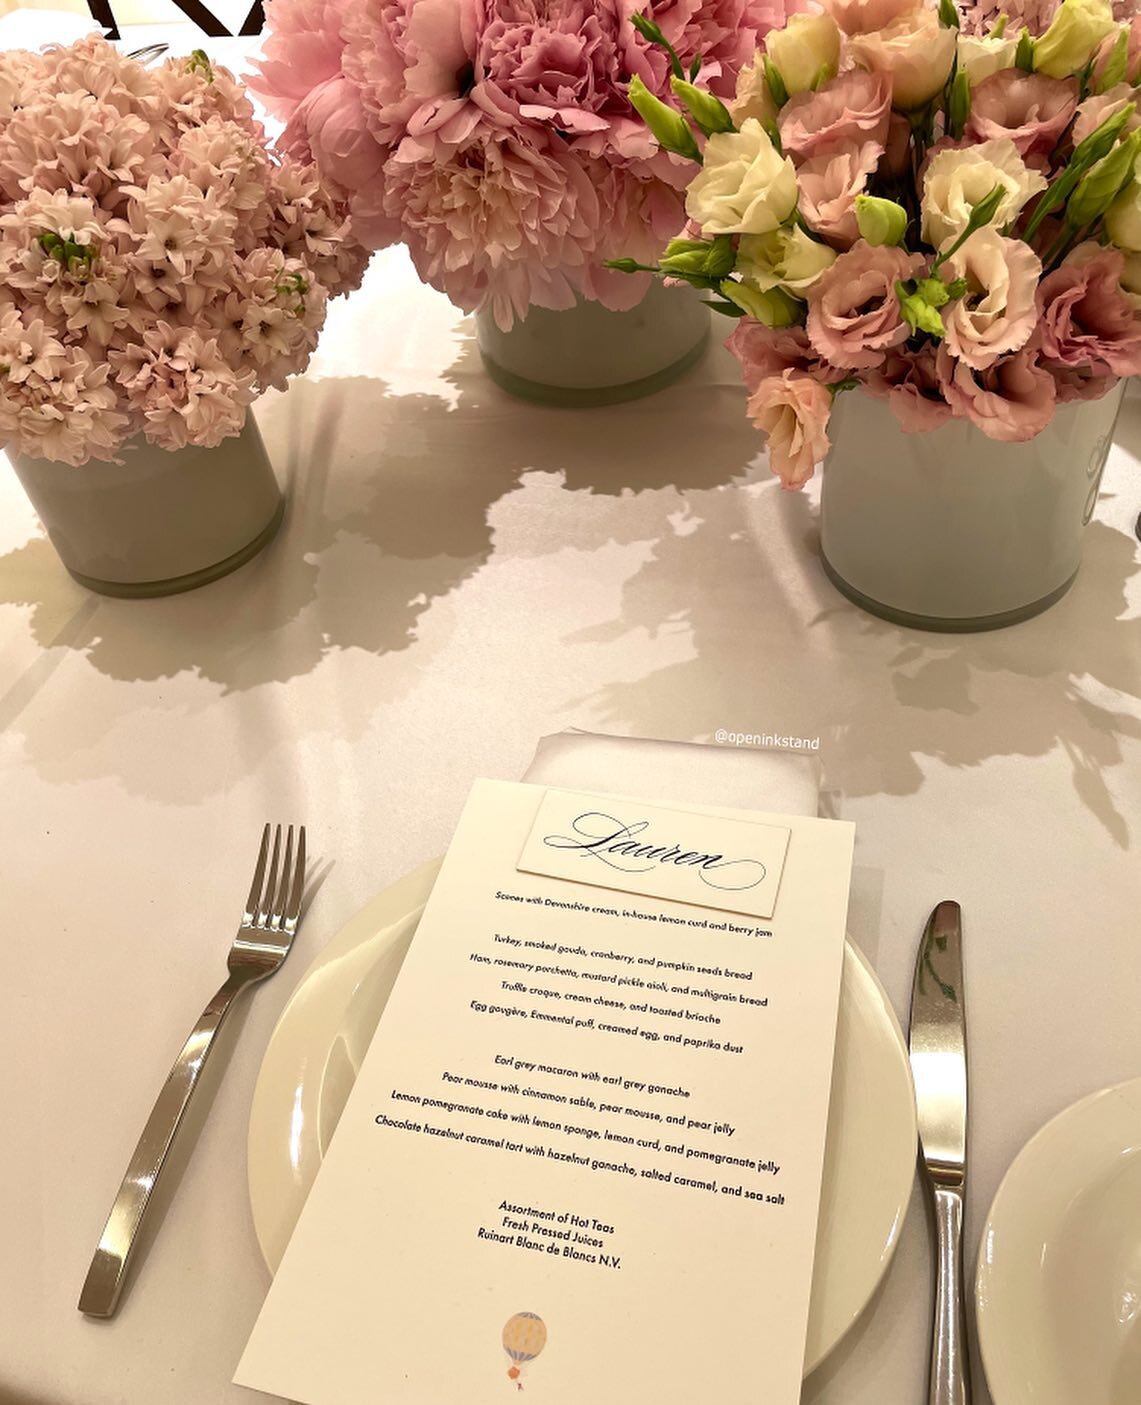 Placecards for this beautiful high tea table set at Louis Vuitton. There were scones, sandwiches, jams and jellies, a calligrapher and illustrator (me!) and a harpist playing beautiful music in the background. What an event! Thanks for having me 🌟🌸